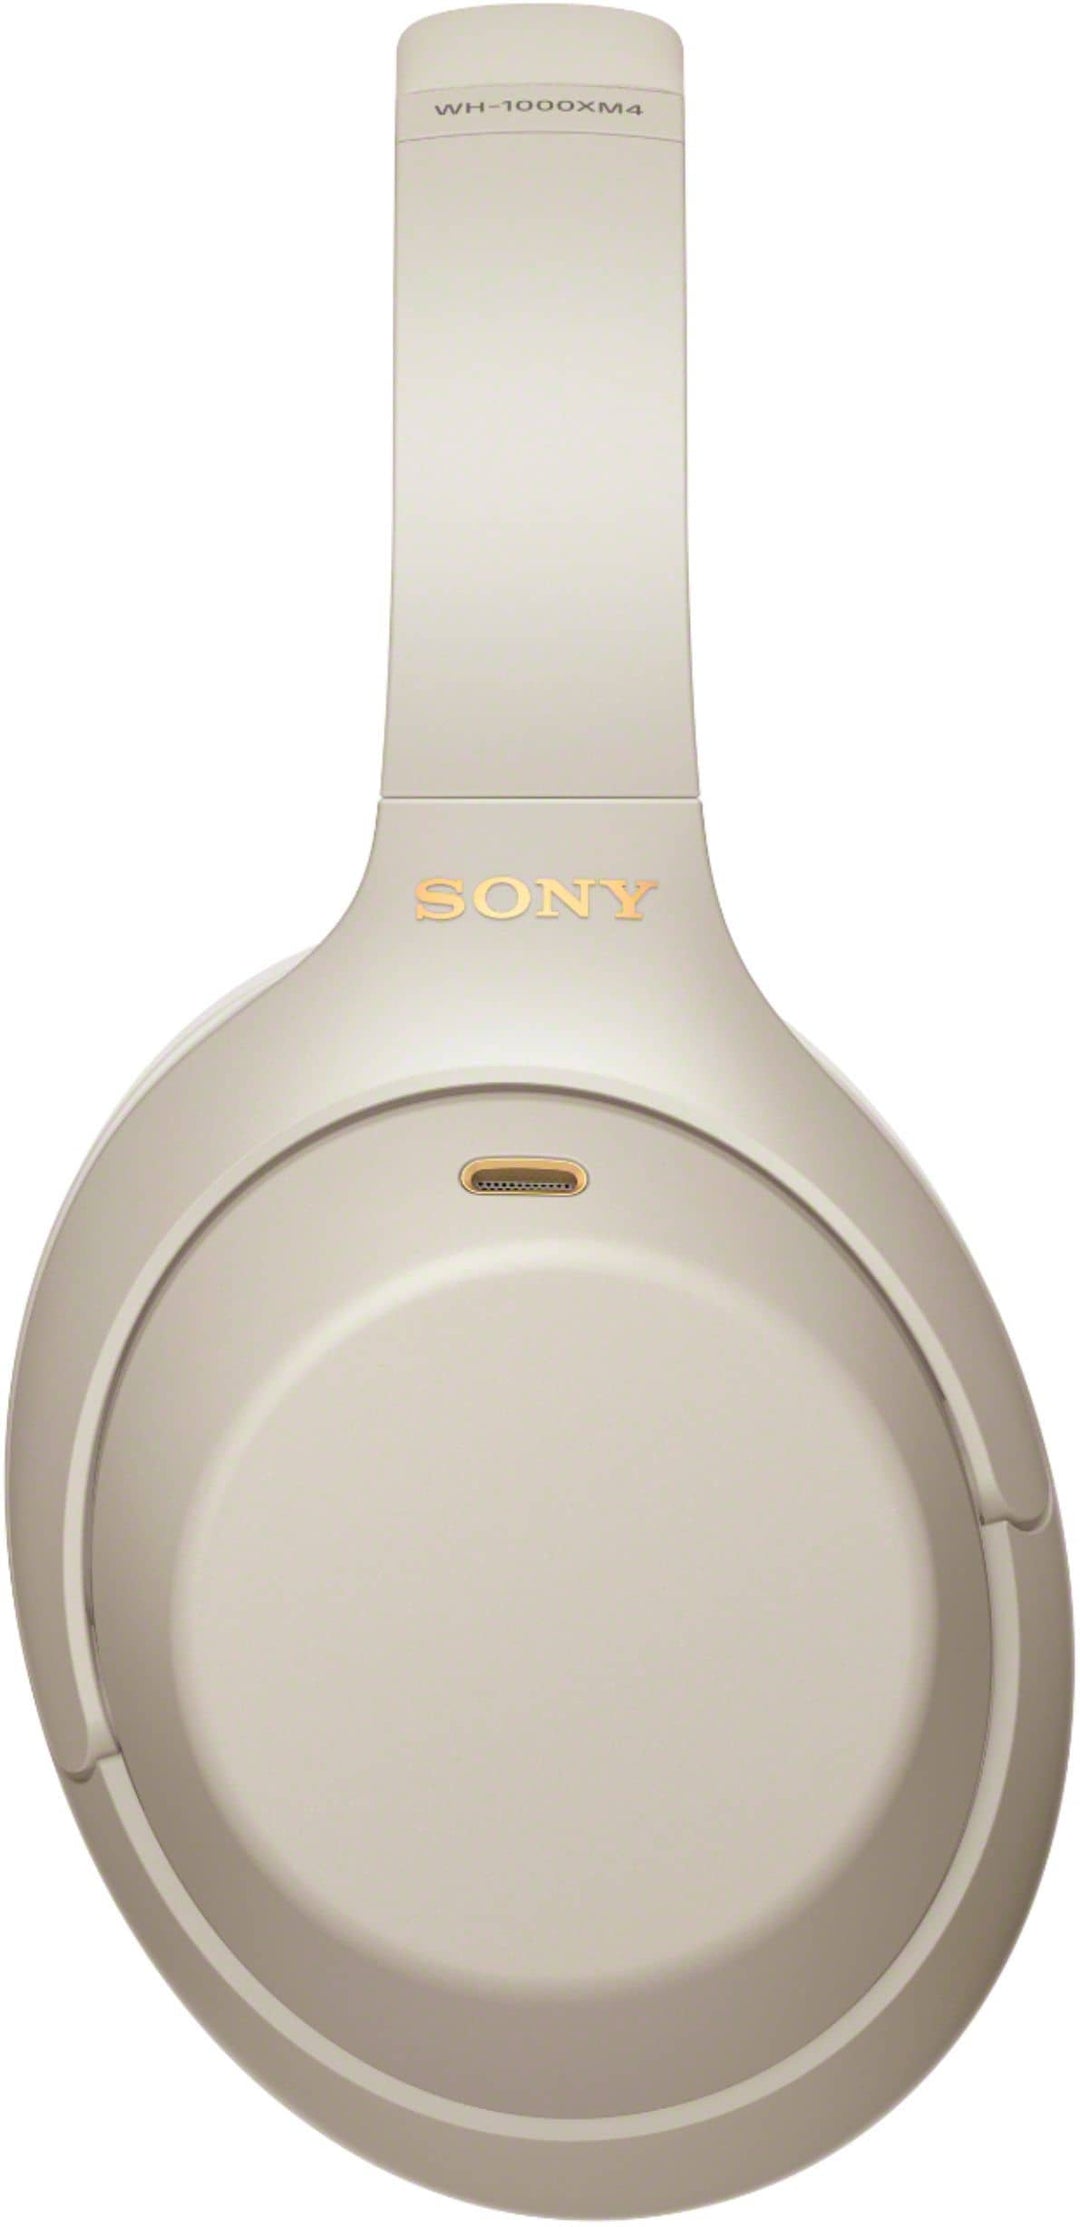 Sony - WH-1000XM4 Wireless Noise-Cancelling Over-the-Ear Headphones - Silver_5